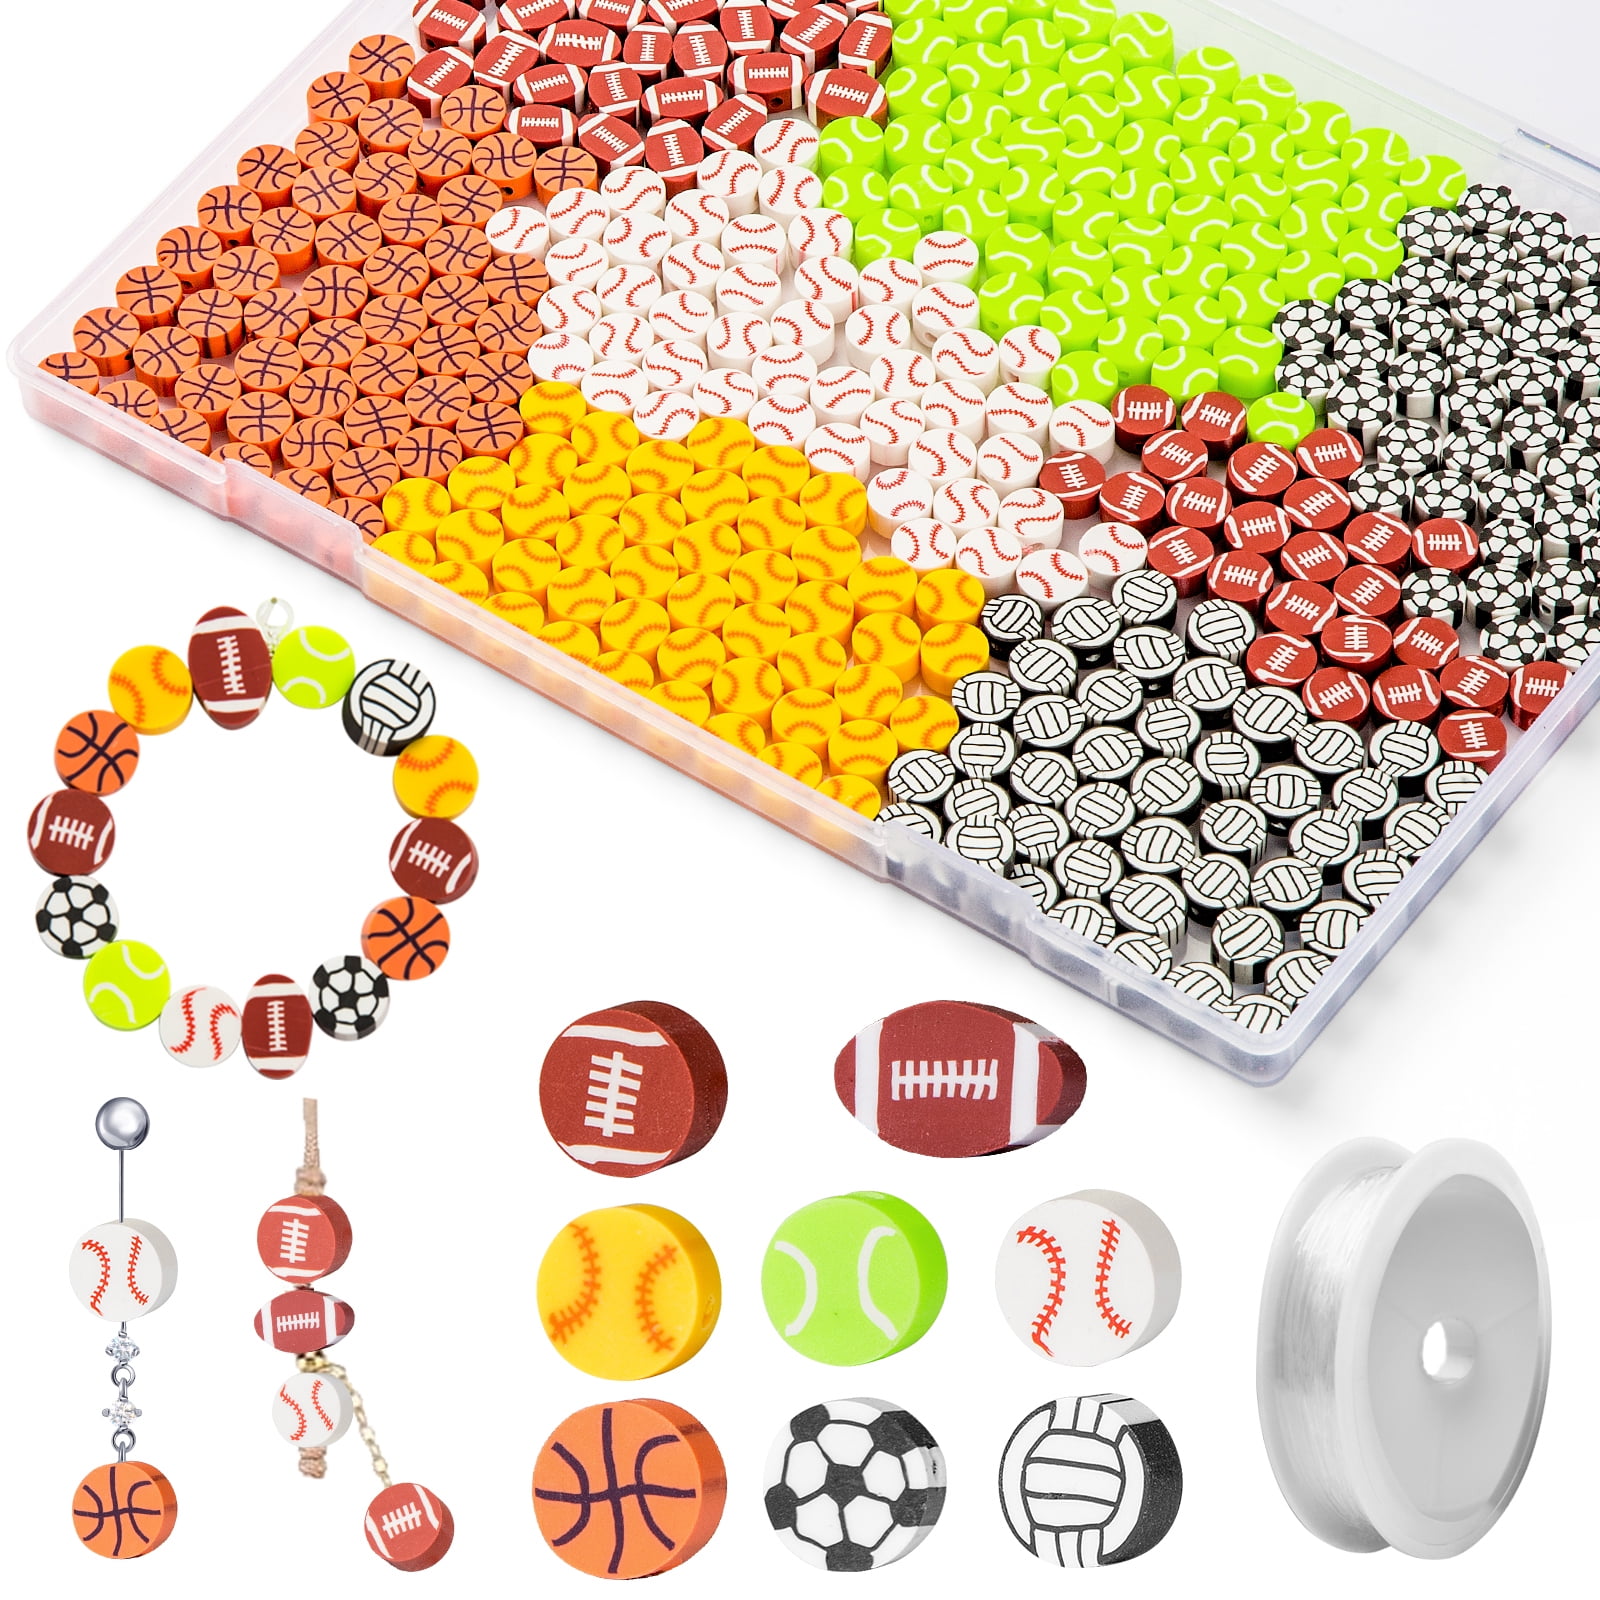 PEACNNG Polymer Clay Beads for Jewelry Making, 18 Colors 6mm Colored Flat  Round Clay Beads for DIY Bracelets Craft Kit with A-Z Letter Beads, Shell  Beads, Elastic Cords, Charms and Jump Rings 